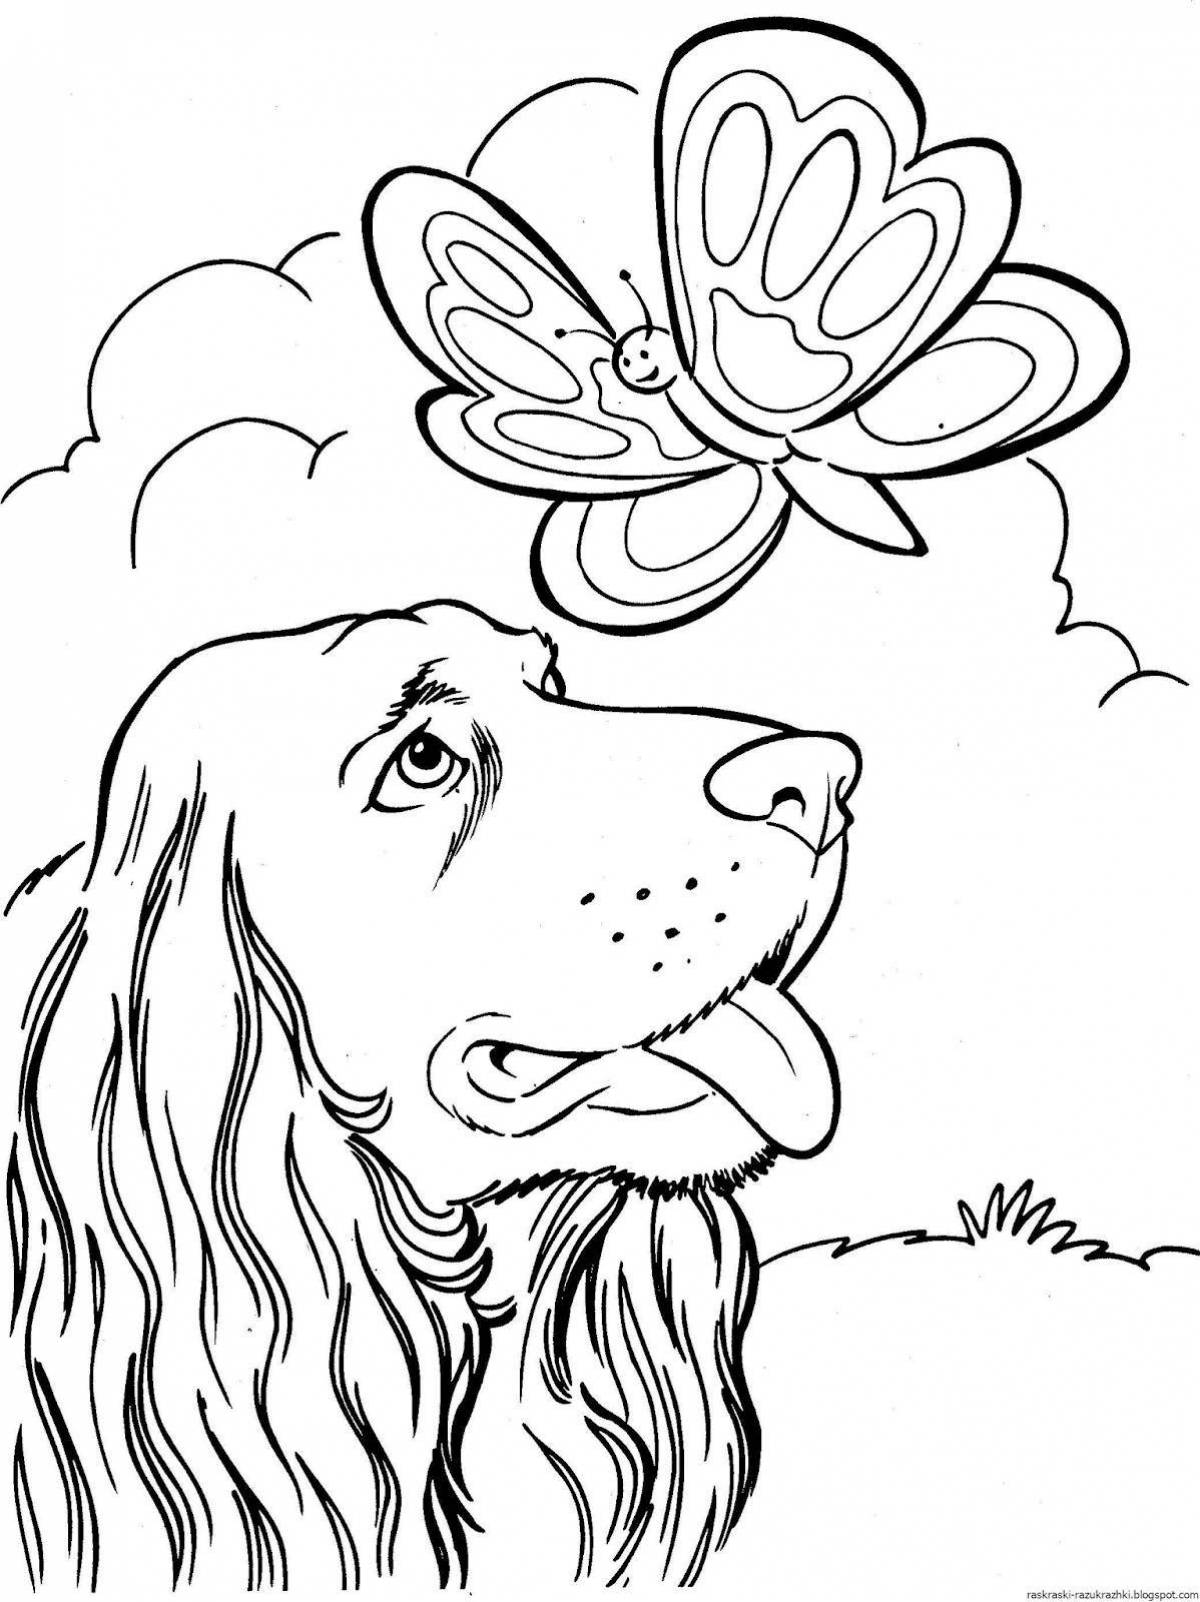 Fabulous coloring for girls 10 years old animals